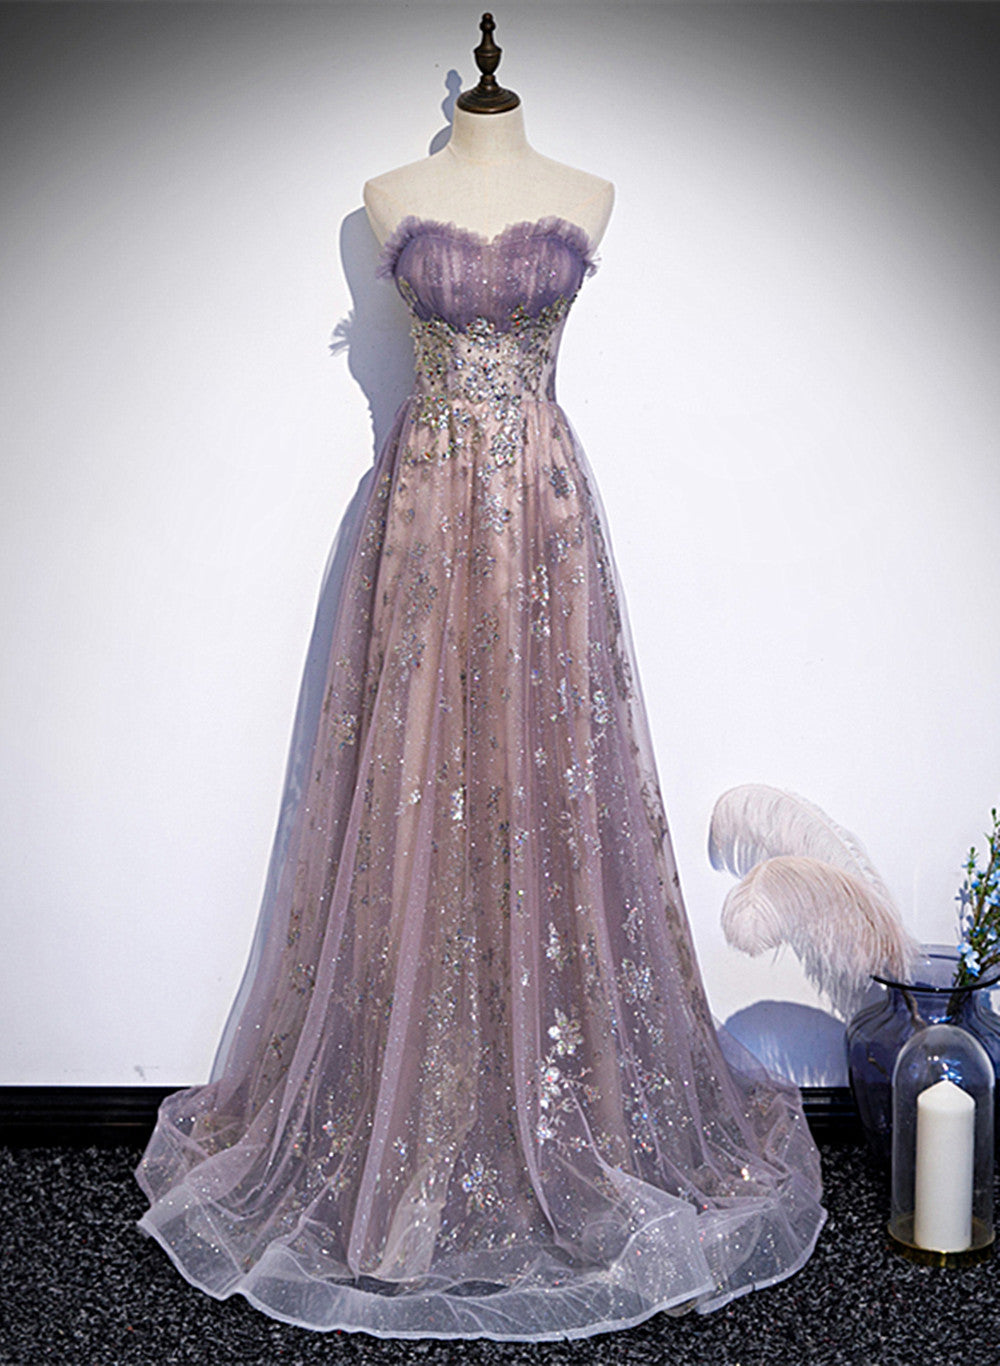 Bridesmaid Dress Convertible, Light Purple Tulle with Lace A-line Floor Length Party Dress, Light Purple Evening Dress